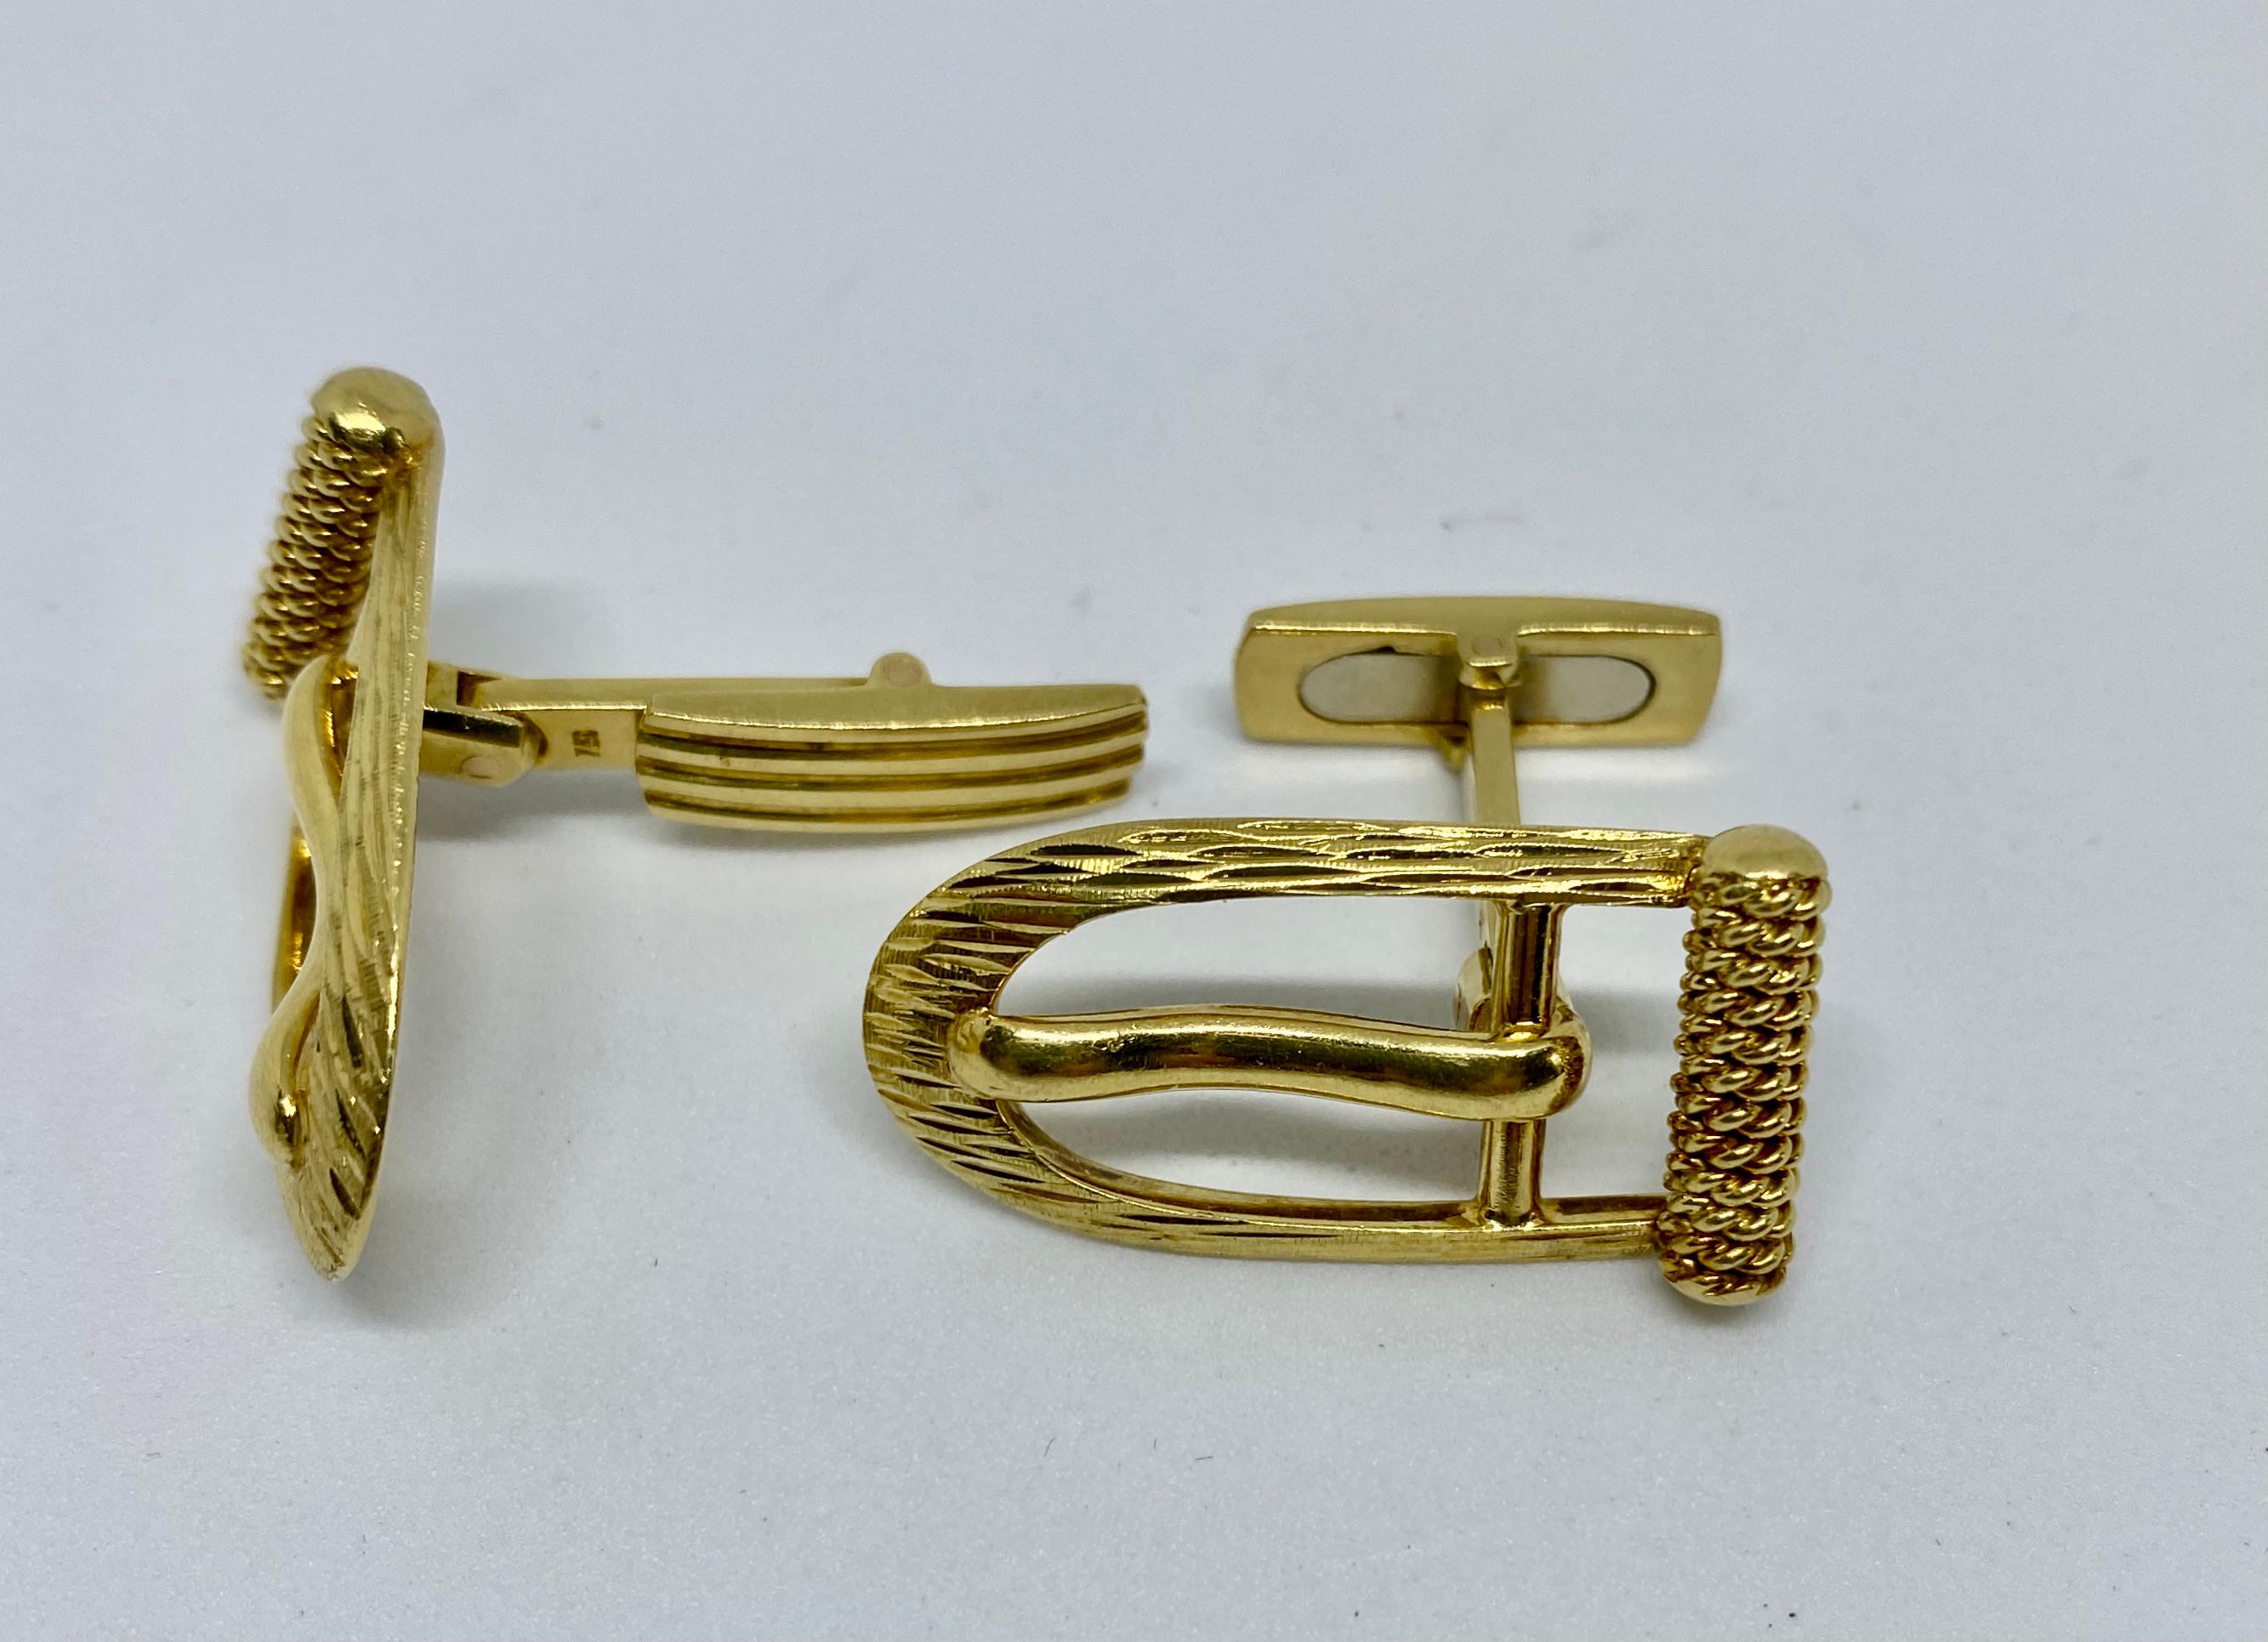 A charming and unusual pair of cufflinks in the form of buckles rendered in solid, 18K yellow gold by Ugo Piccini Firenze.

Established in 1952, the firm of Ugo Piccini is located on Florence's legendary Ponte Vecchio, home to the Renaissance city's